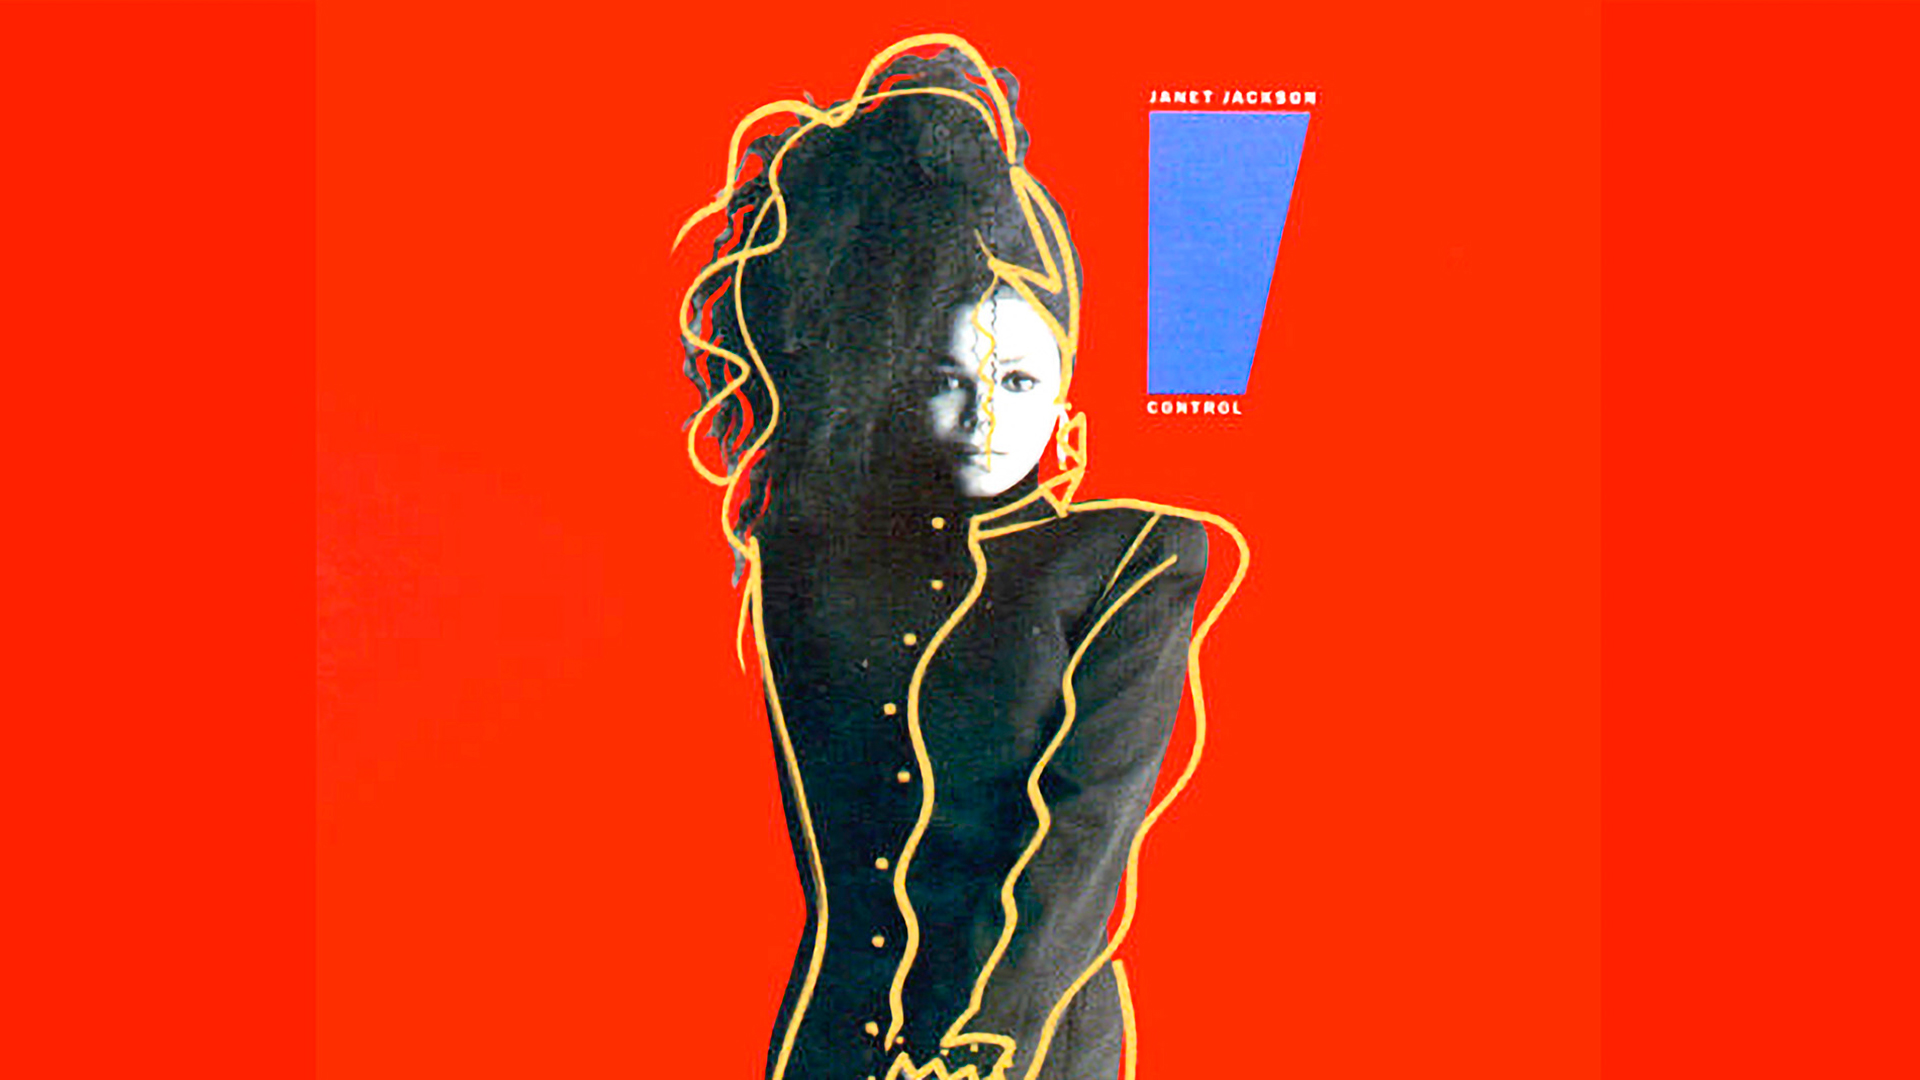 February 4, 1986: Janet Jackson’s “Control" Was Released and Became Her First No. 1 Album